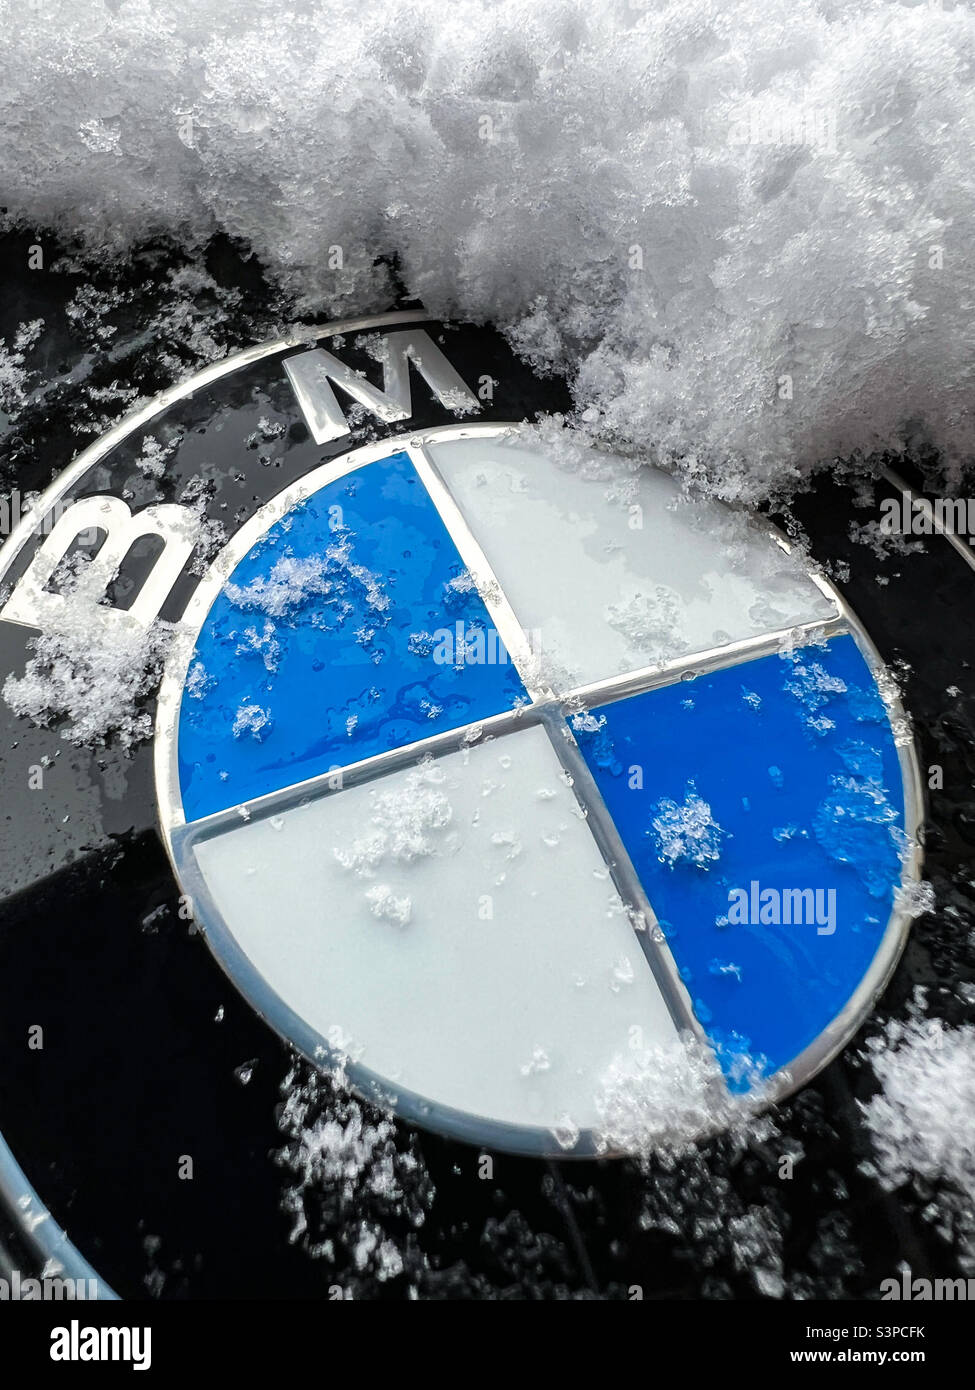 BMW logo badge covered in snow Stock Photo